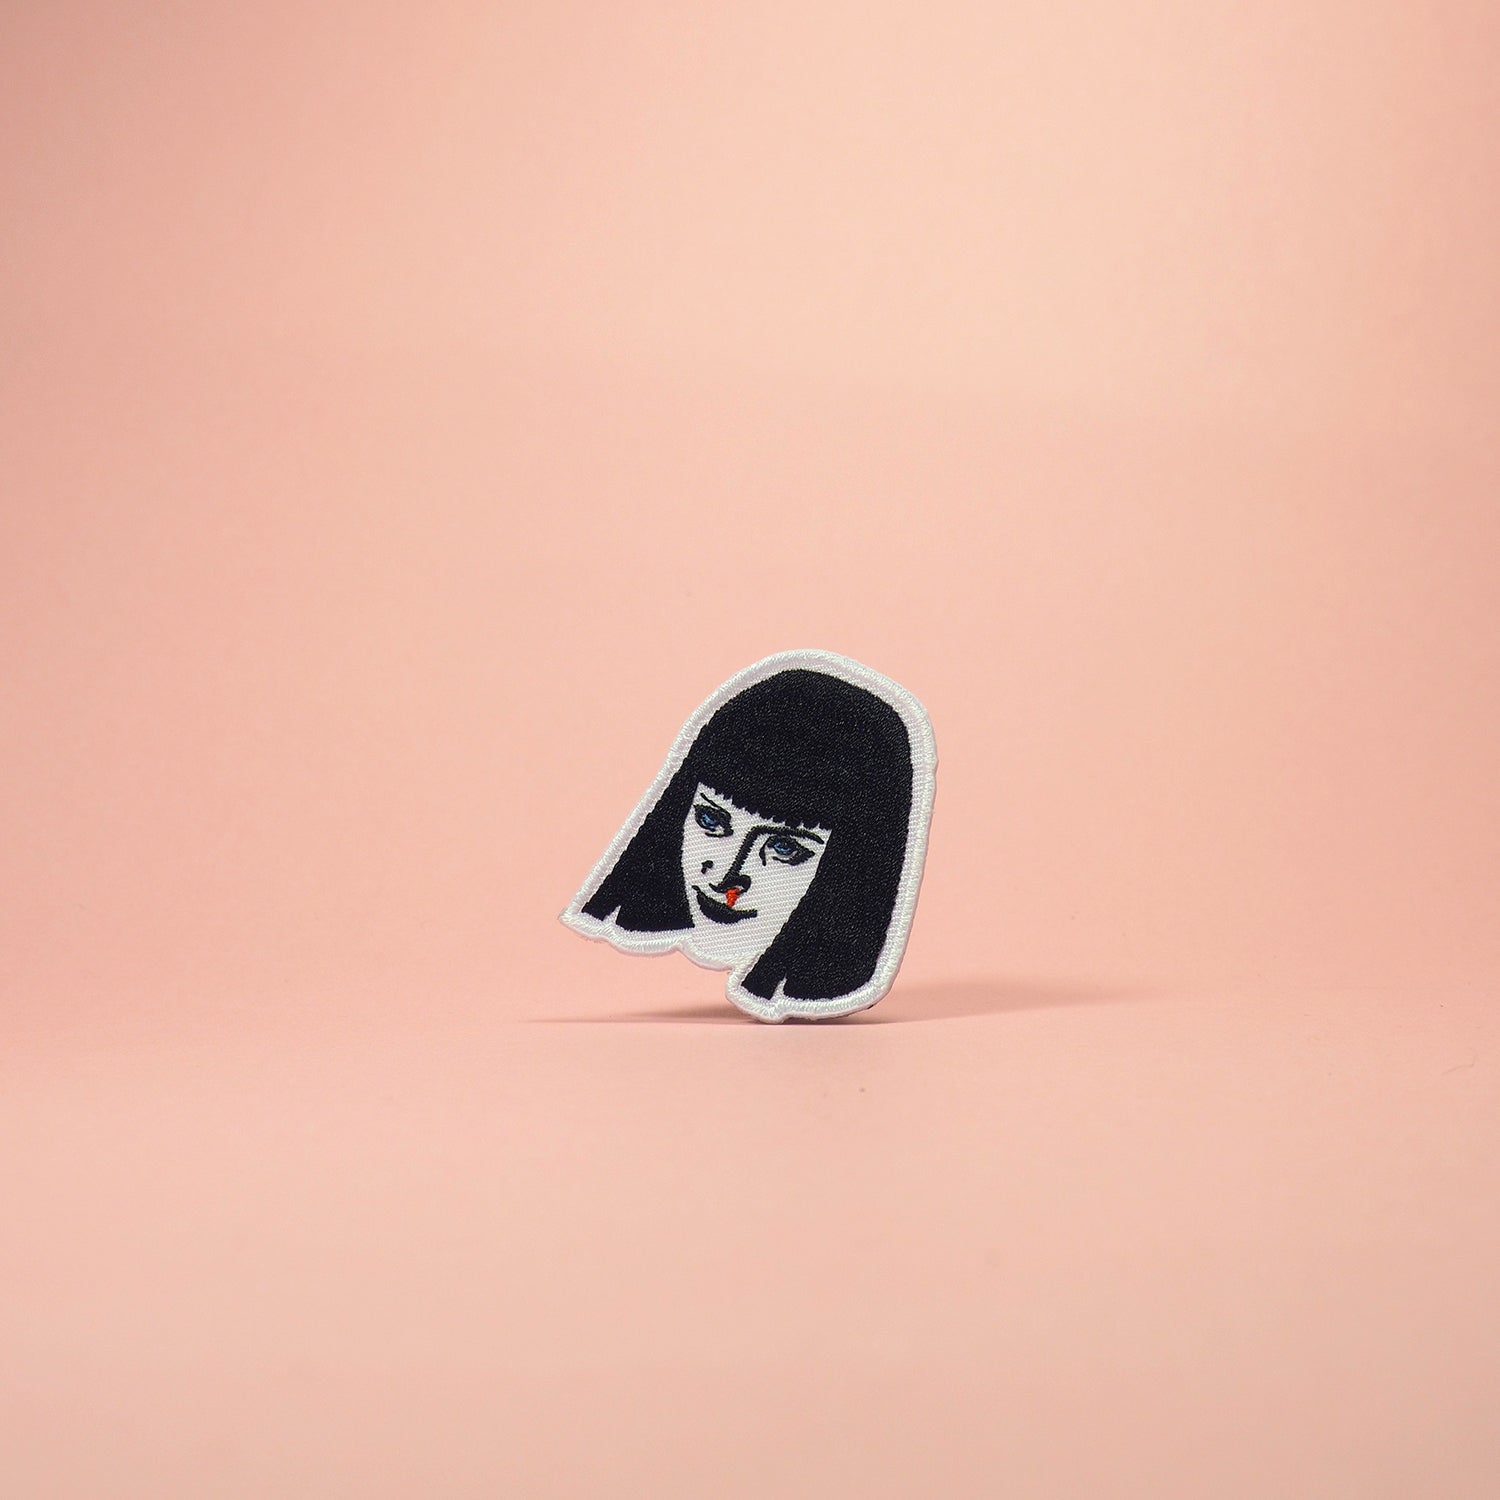 mia_wallace_blood_patch